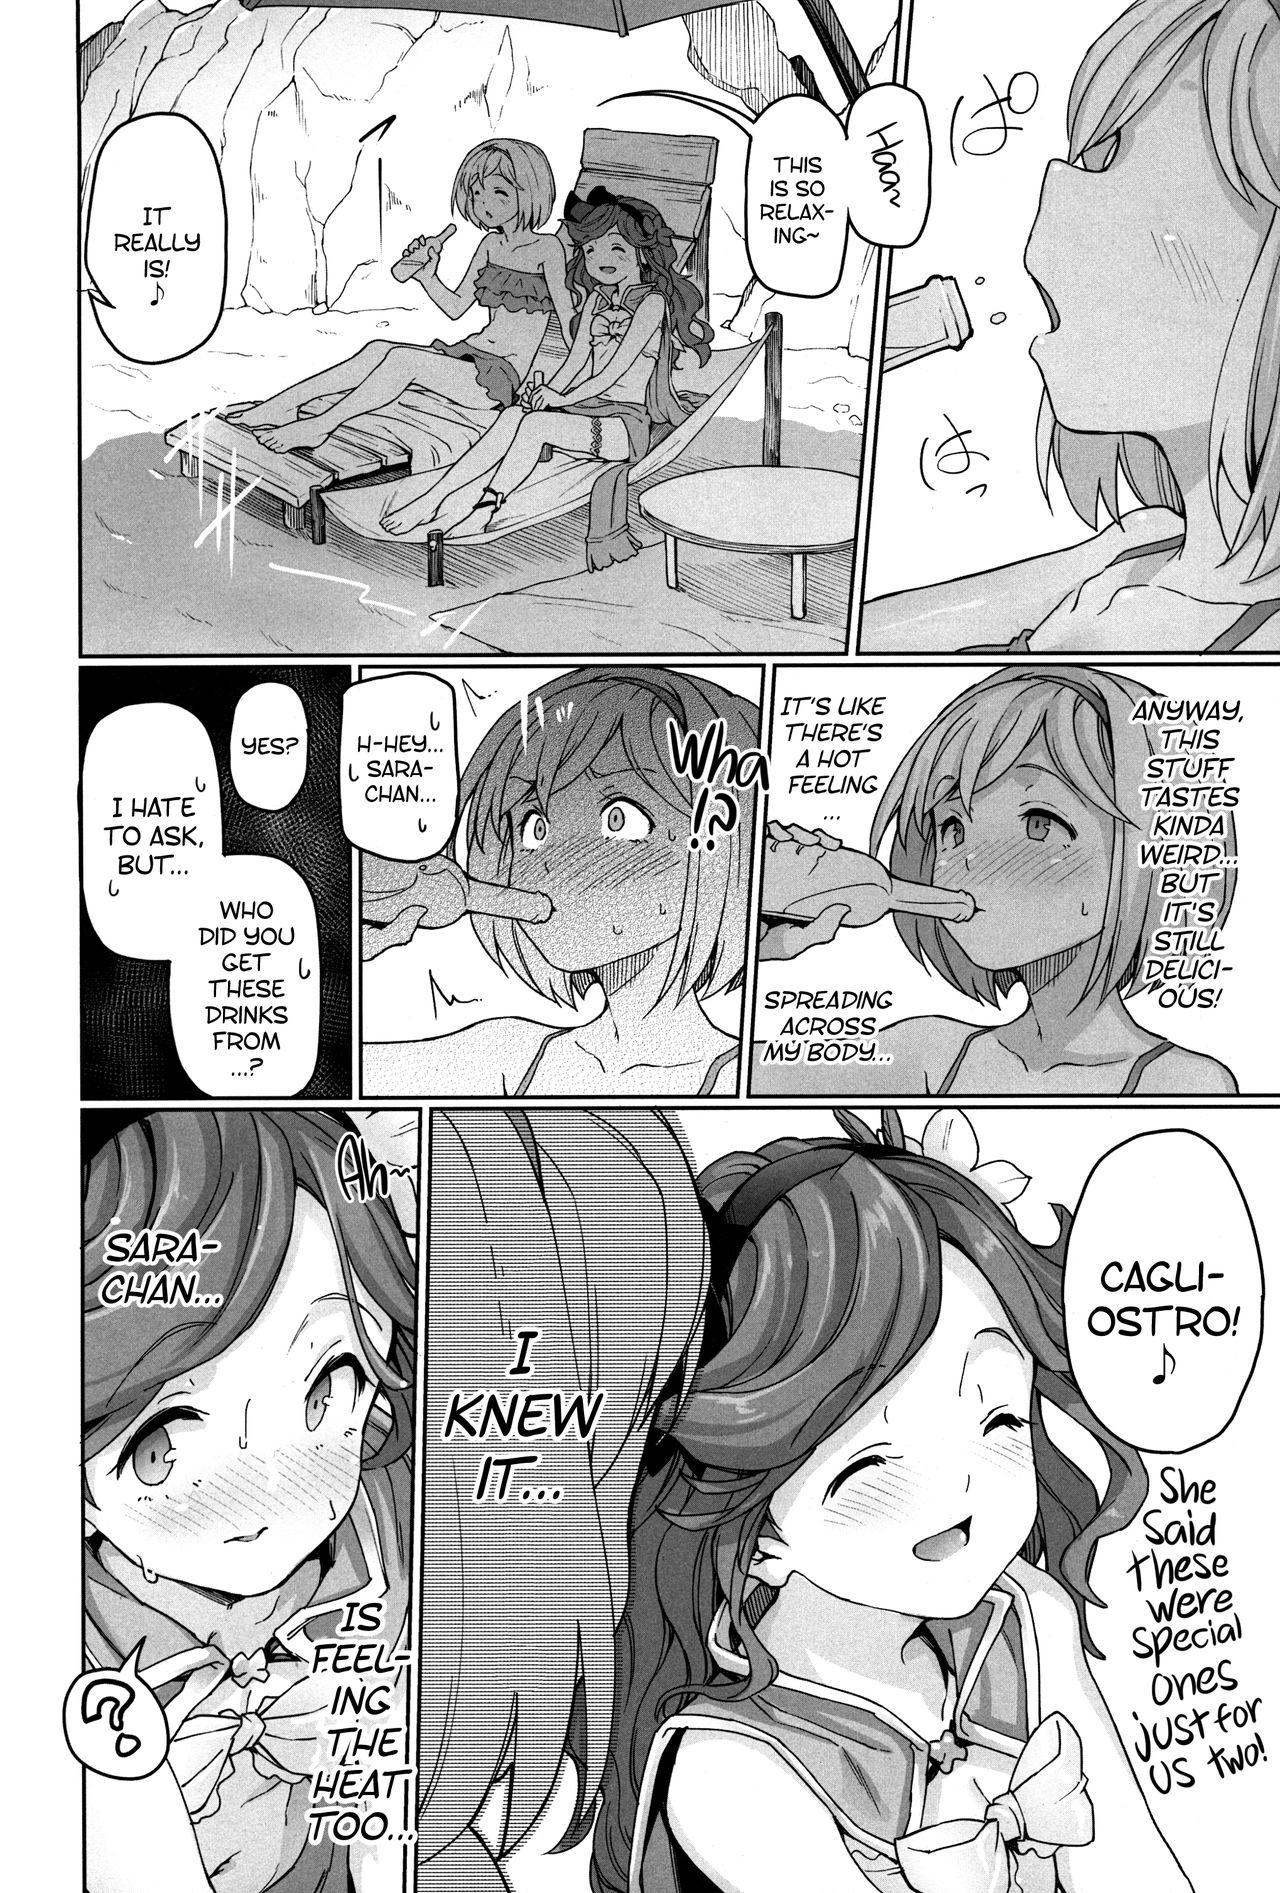 Dick Sunagami no Komachi Angel? | A Town Beauty Angel of the Dunes? - Granblue fantasy Deutsche - Page 5